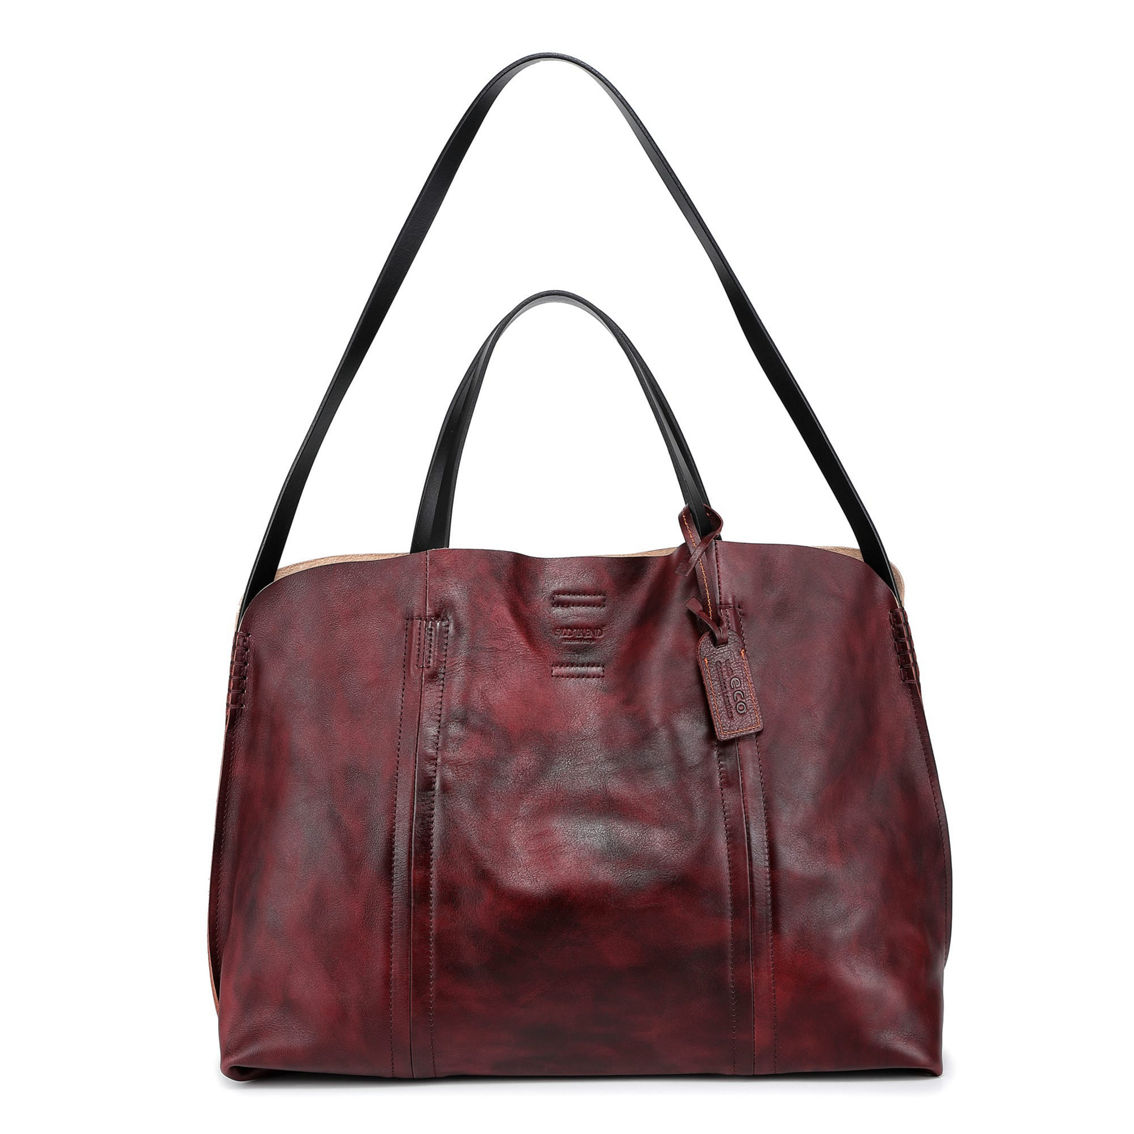 Old Trend Forest Island Leather Tote - Image 3 of 5